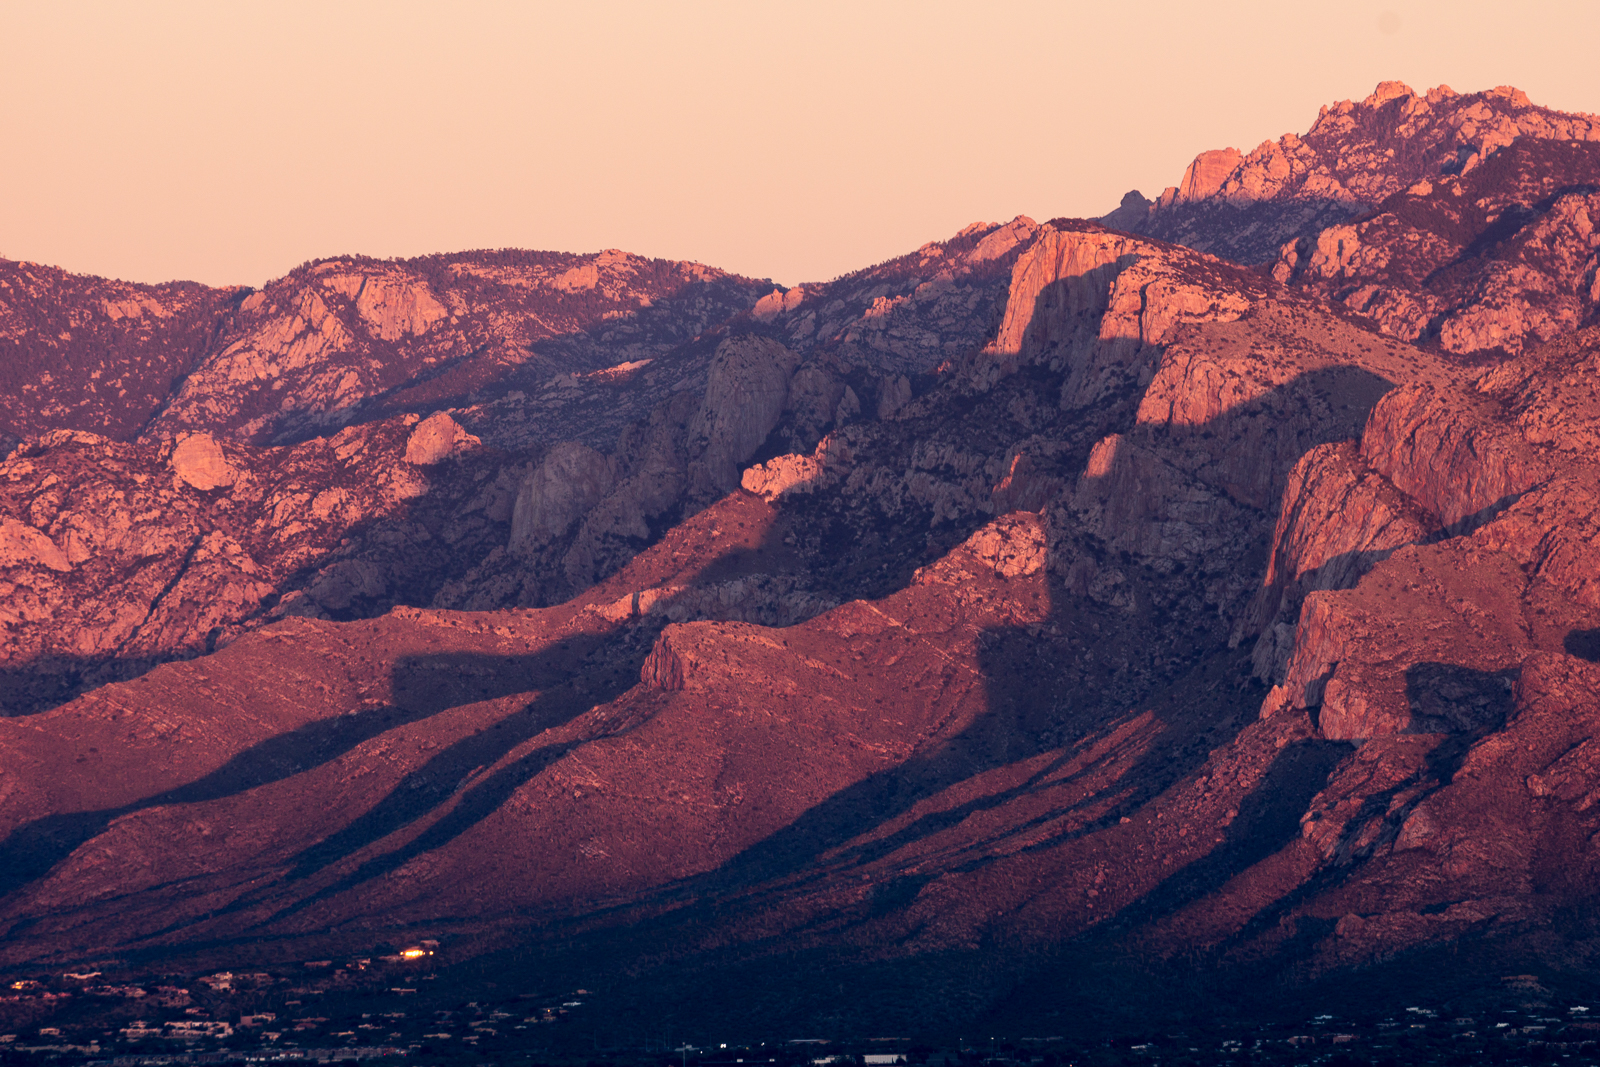 Pusch Ridge - end of the day - from Safford (Sombrero) Peak in the Tucson Mountains. November 2015.